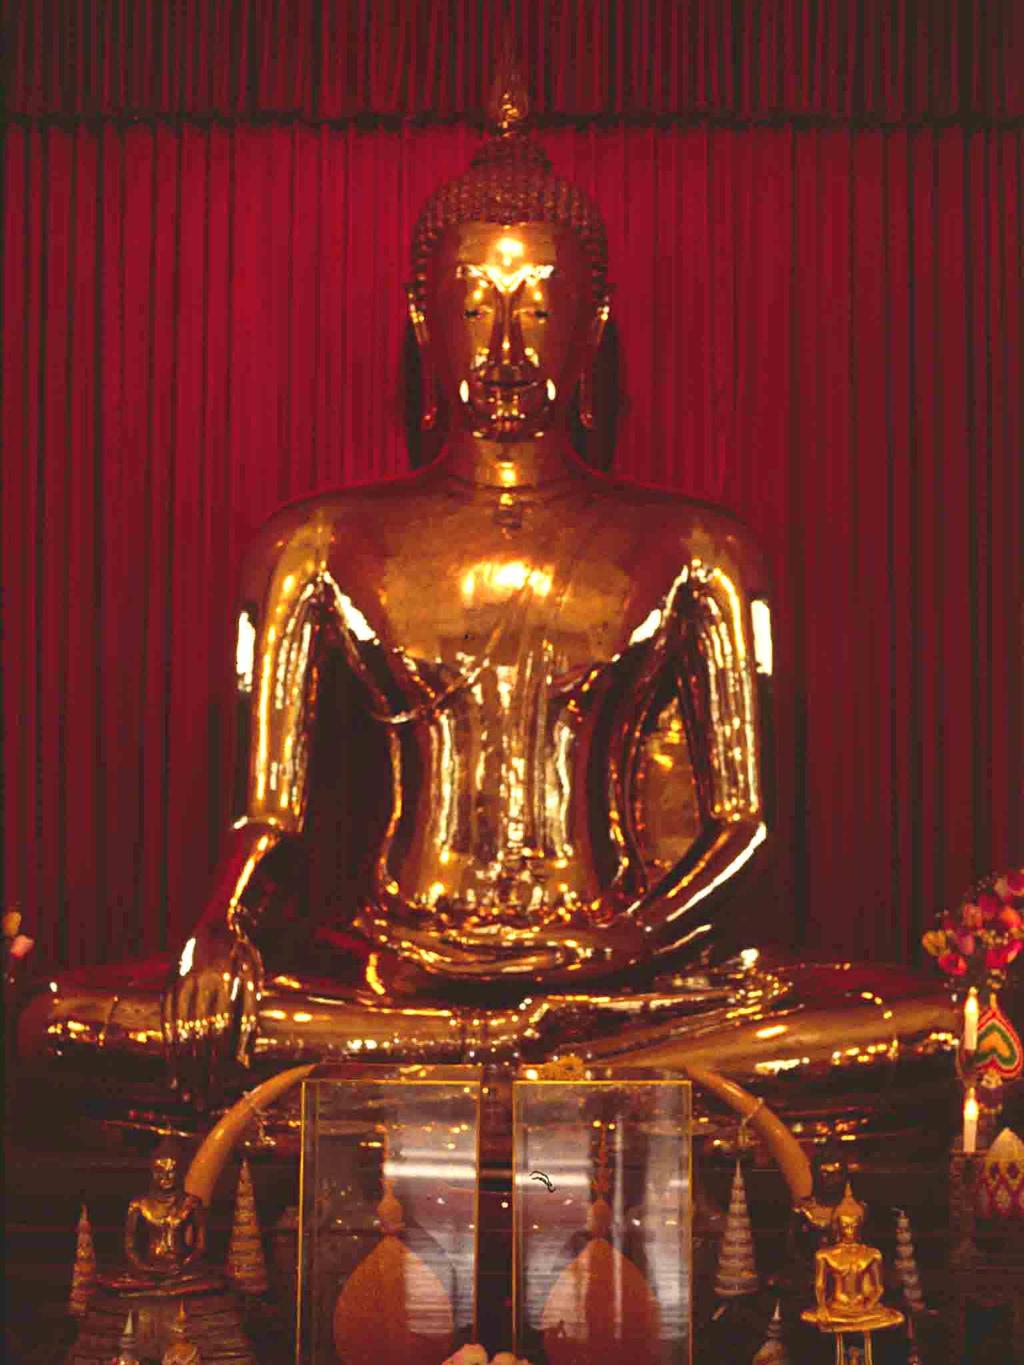 When we saw the Golden Buddha on our last trip, it was located in a temple of much